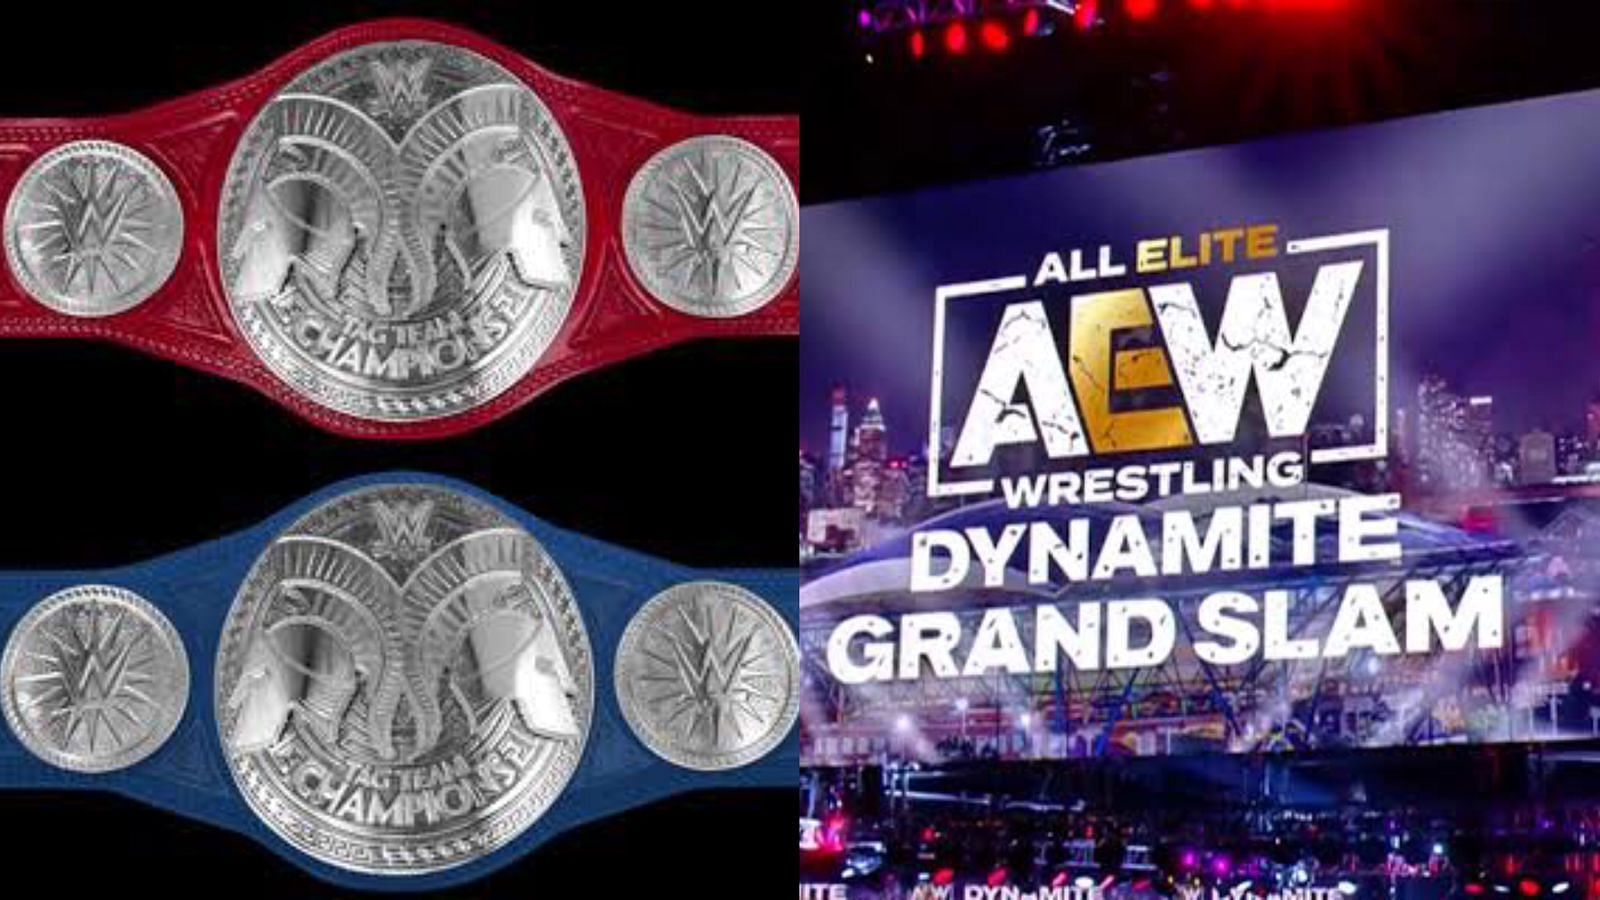 Former WWE tag team Champion teases an appearance at AEW Grand Slam